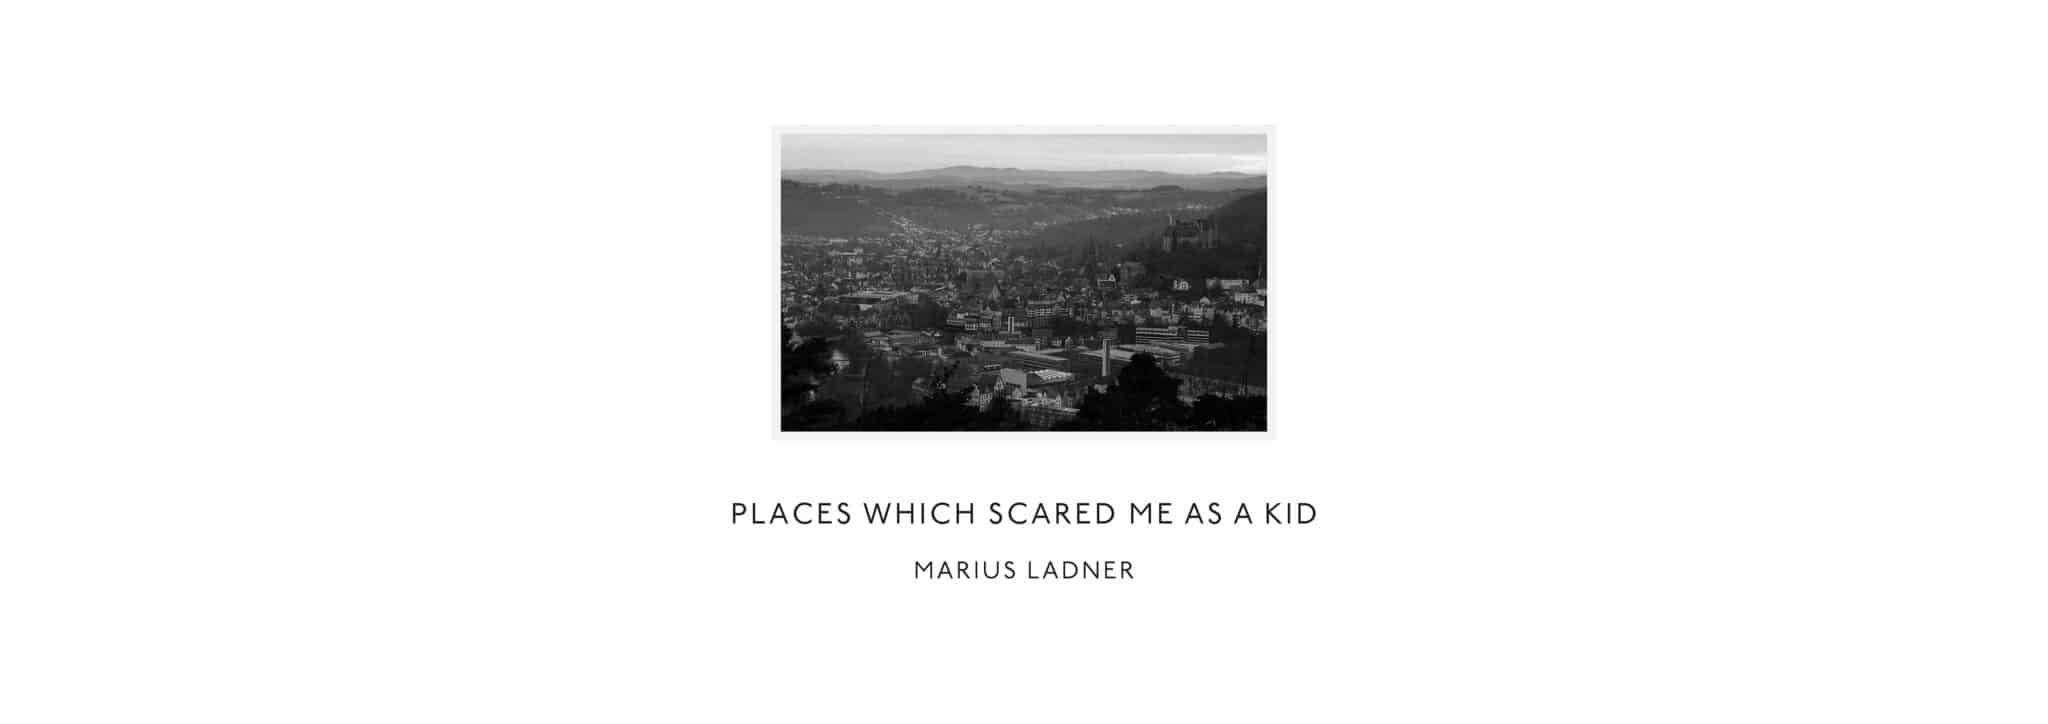 2022-02-13_Ladner-Marius_Places-which-scared-me-as-a-kid_Page_01-1